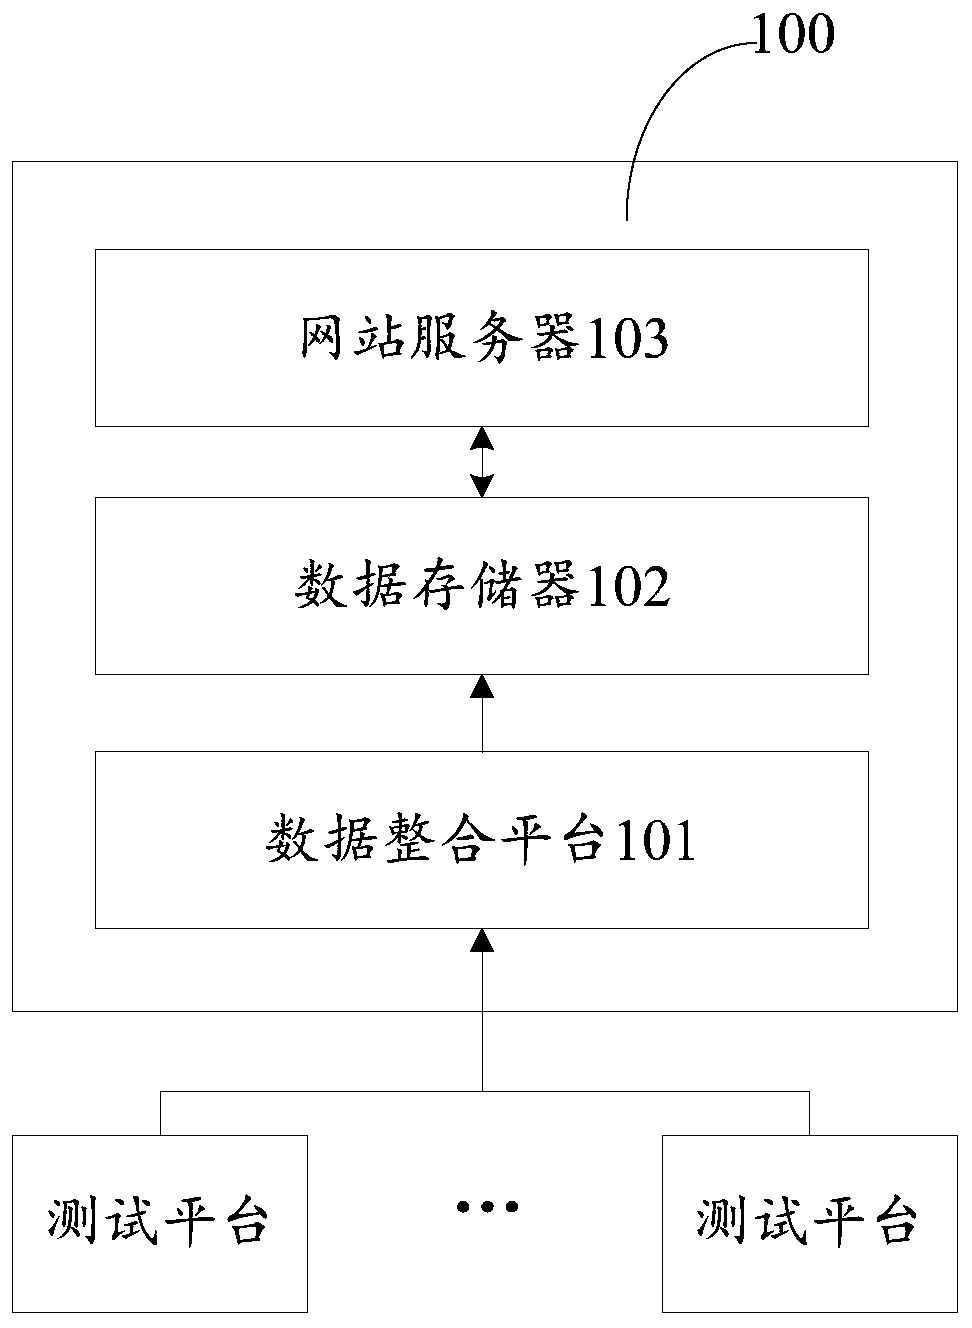 Test data management system and method